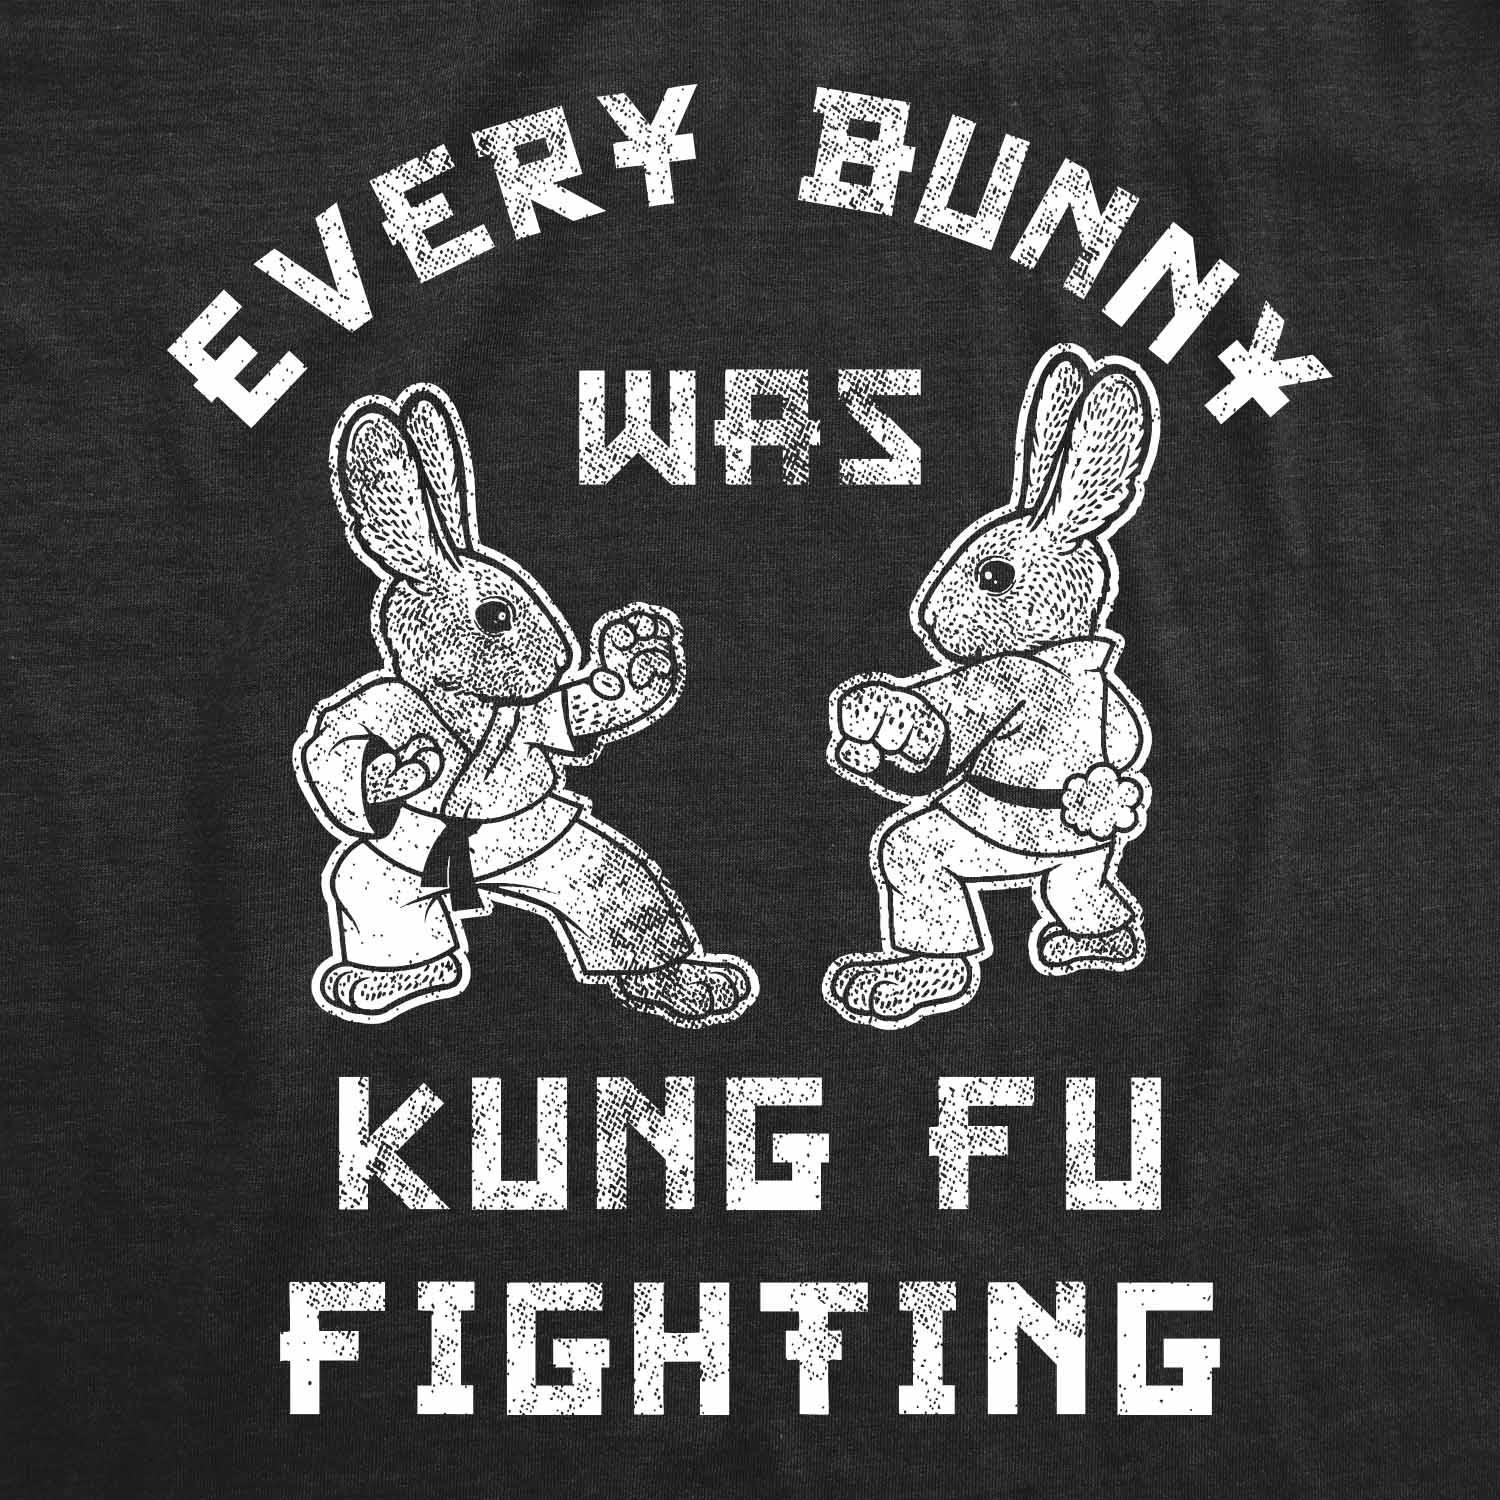 Funny Heather Black - Bunny Kung Fu Every Bunny Was Kung Fu Fighting Womens T Shirt Nerdy Easter Animal Sarcastic Tee